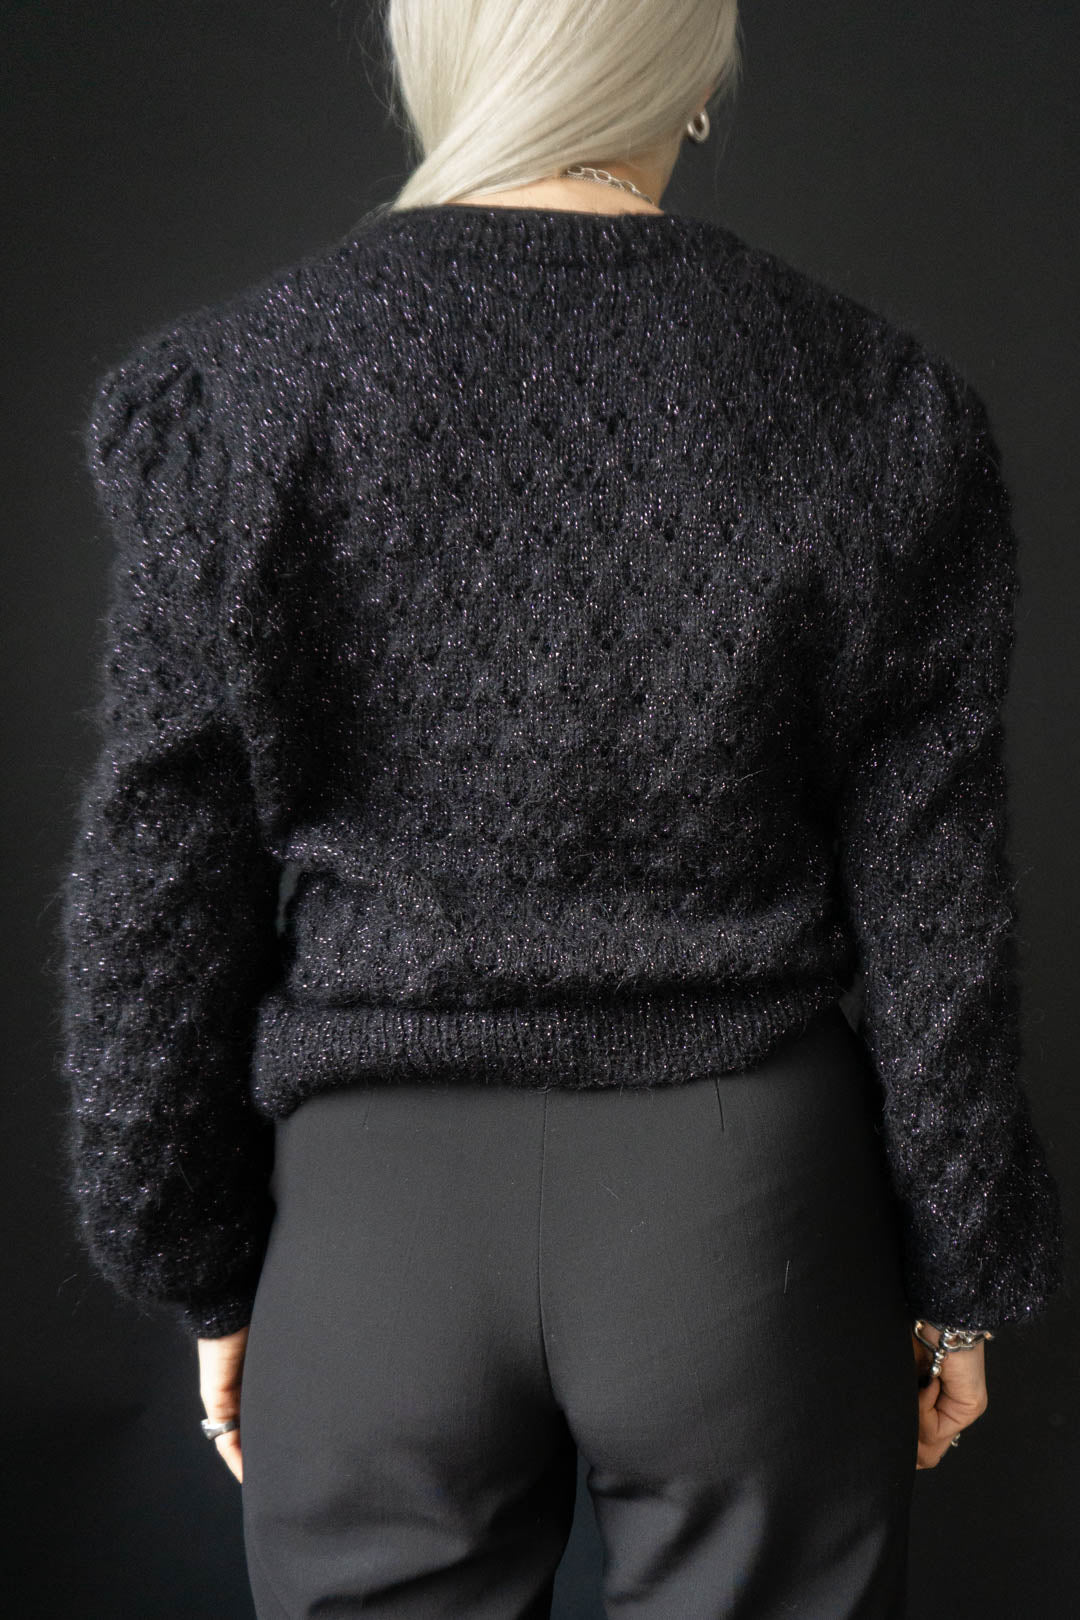 –Personal Archive– Handmade Pullover